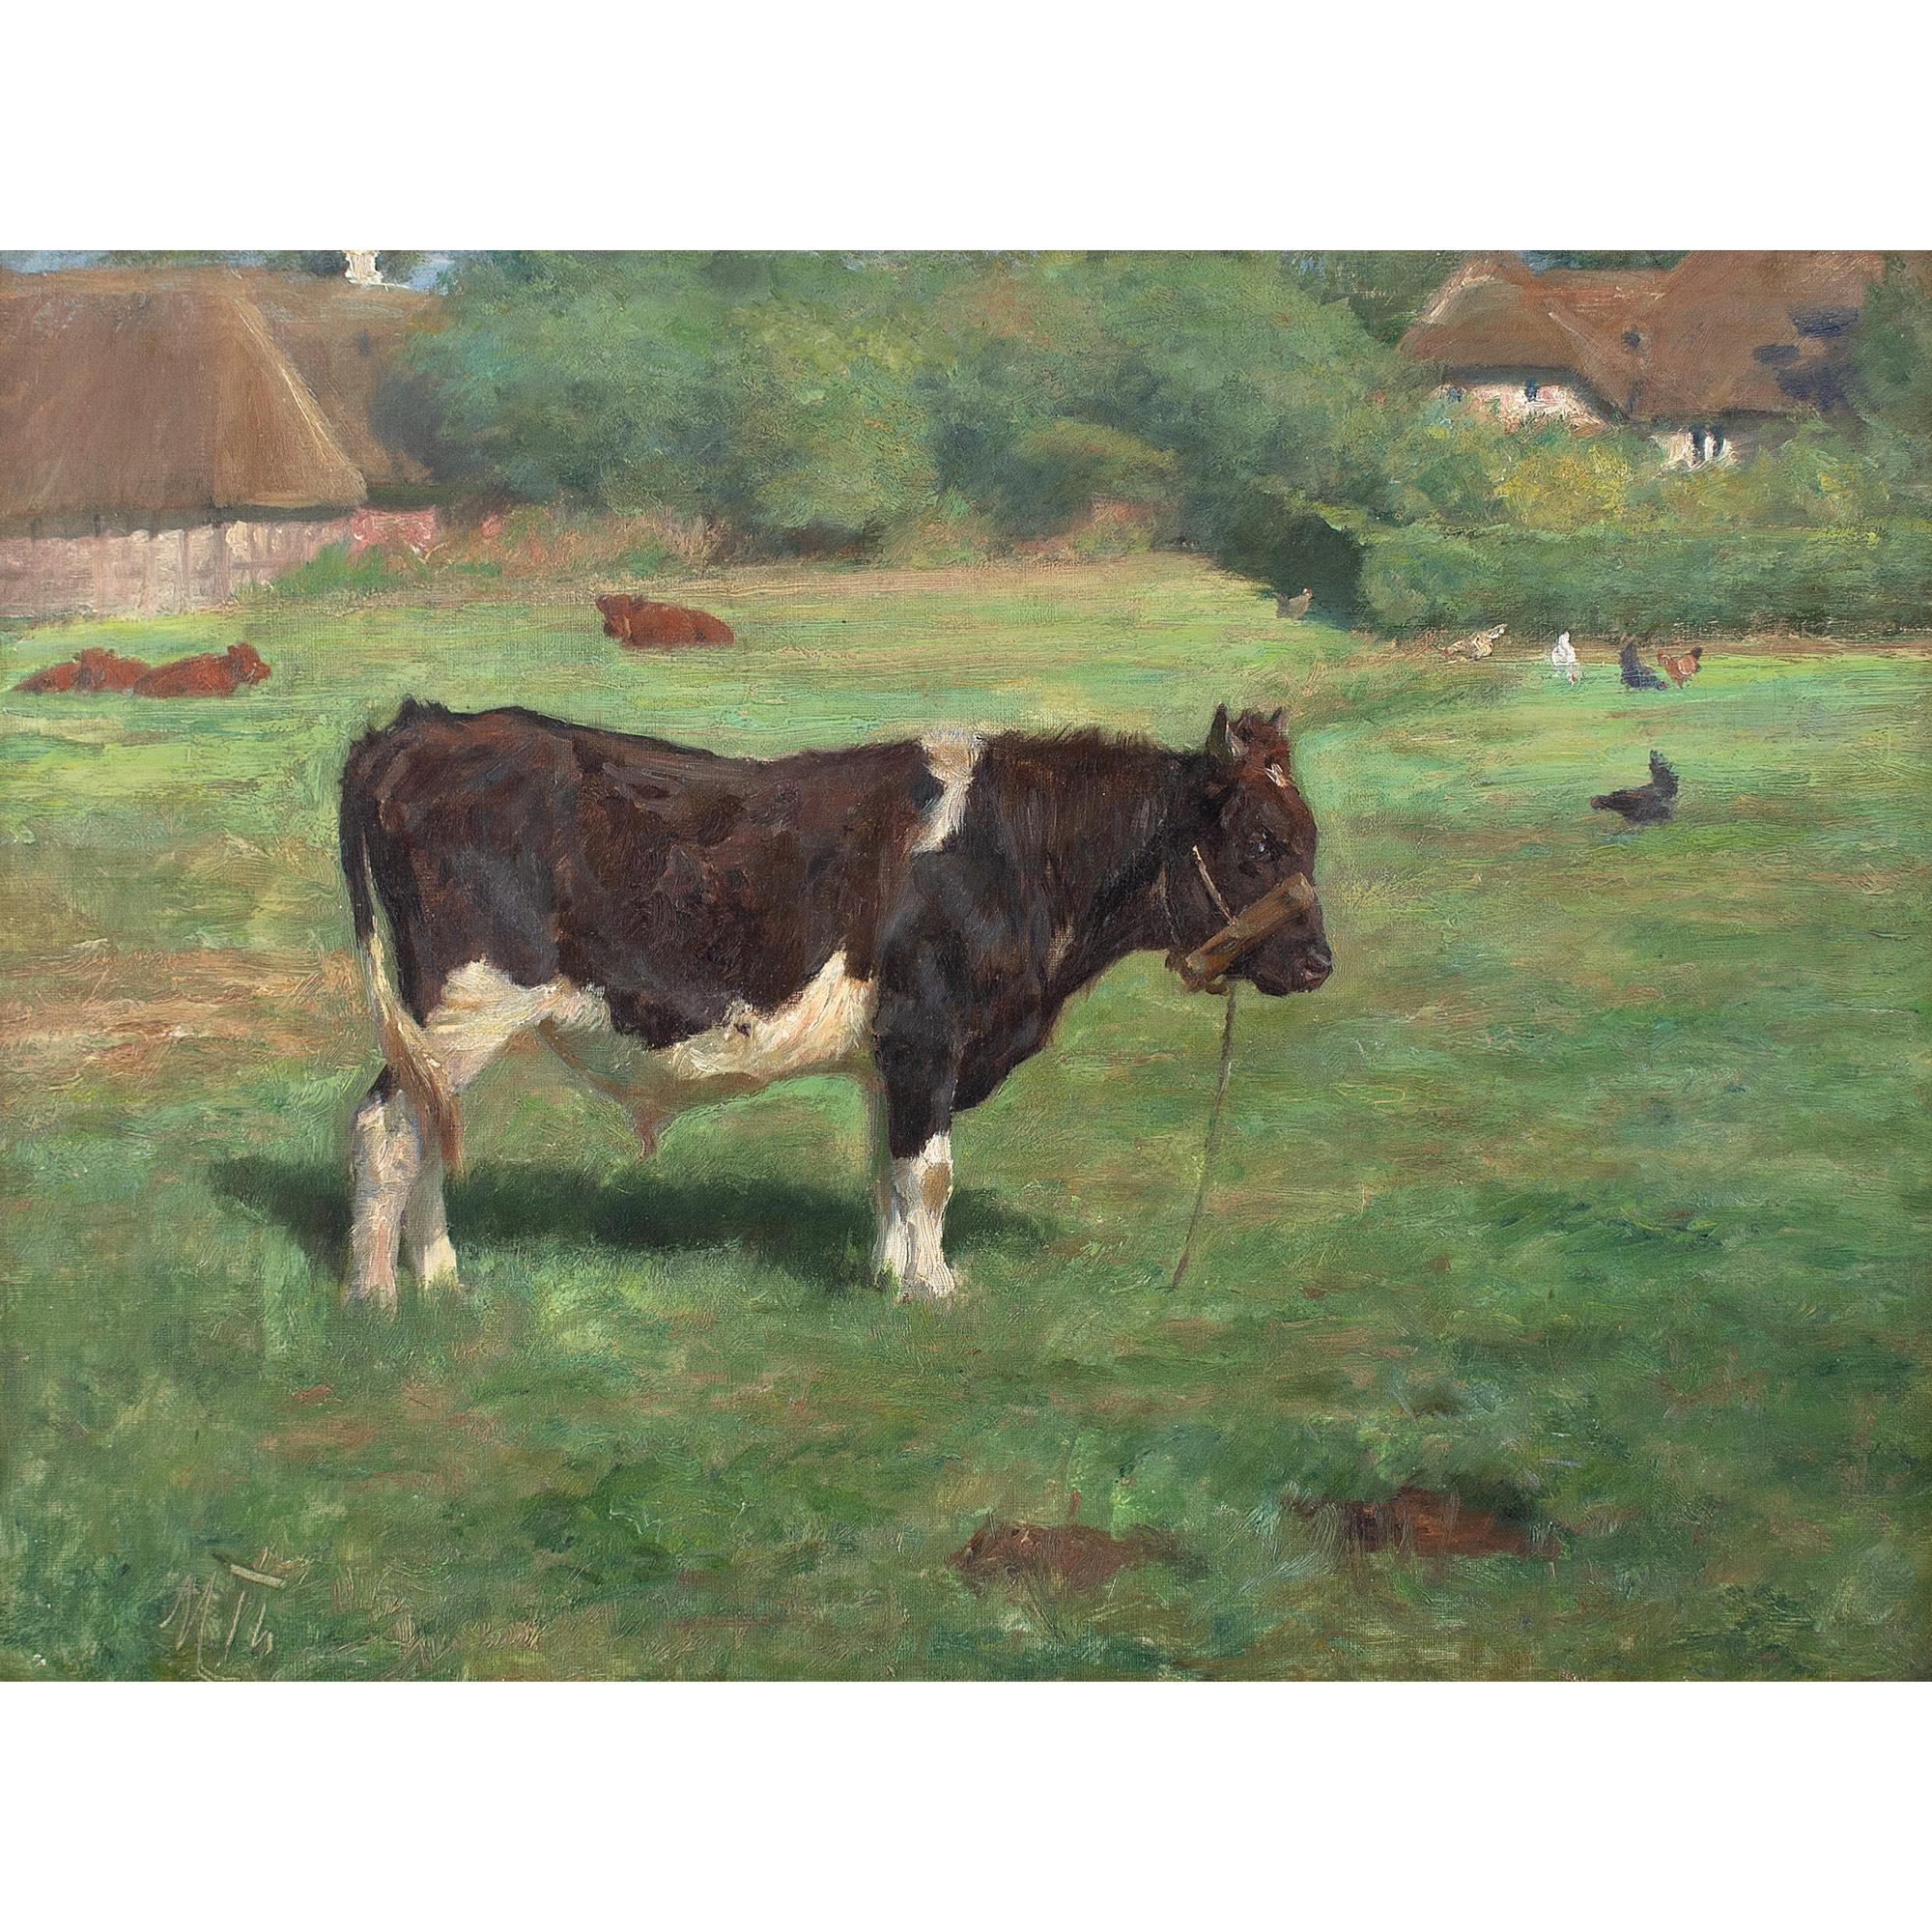 This early 20th-century oil painting by Danish artist Michael Therkildsen (1850-1925) depicts a rural landscape with a standing bull, resting cattle, chickens and thatched buildings. It’s skillfully rendered and demonstrates the artist’s keen